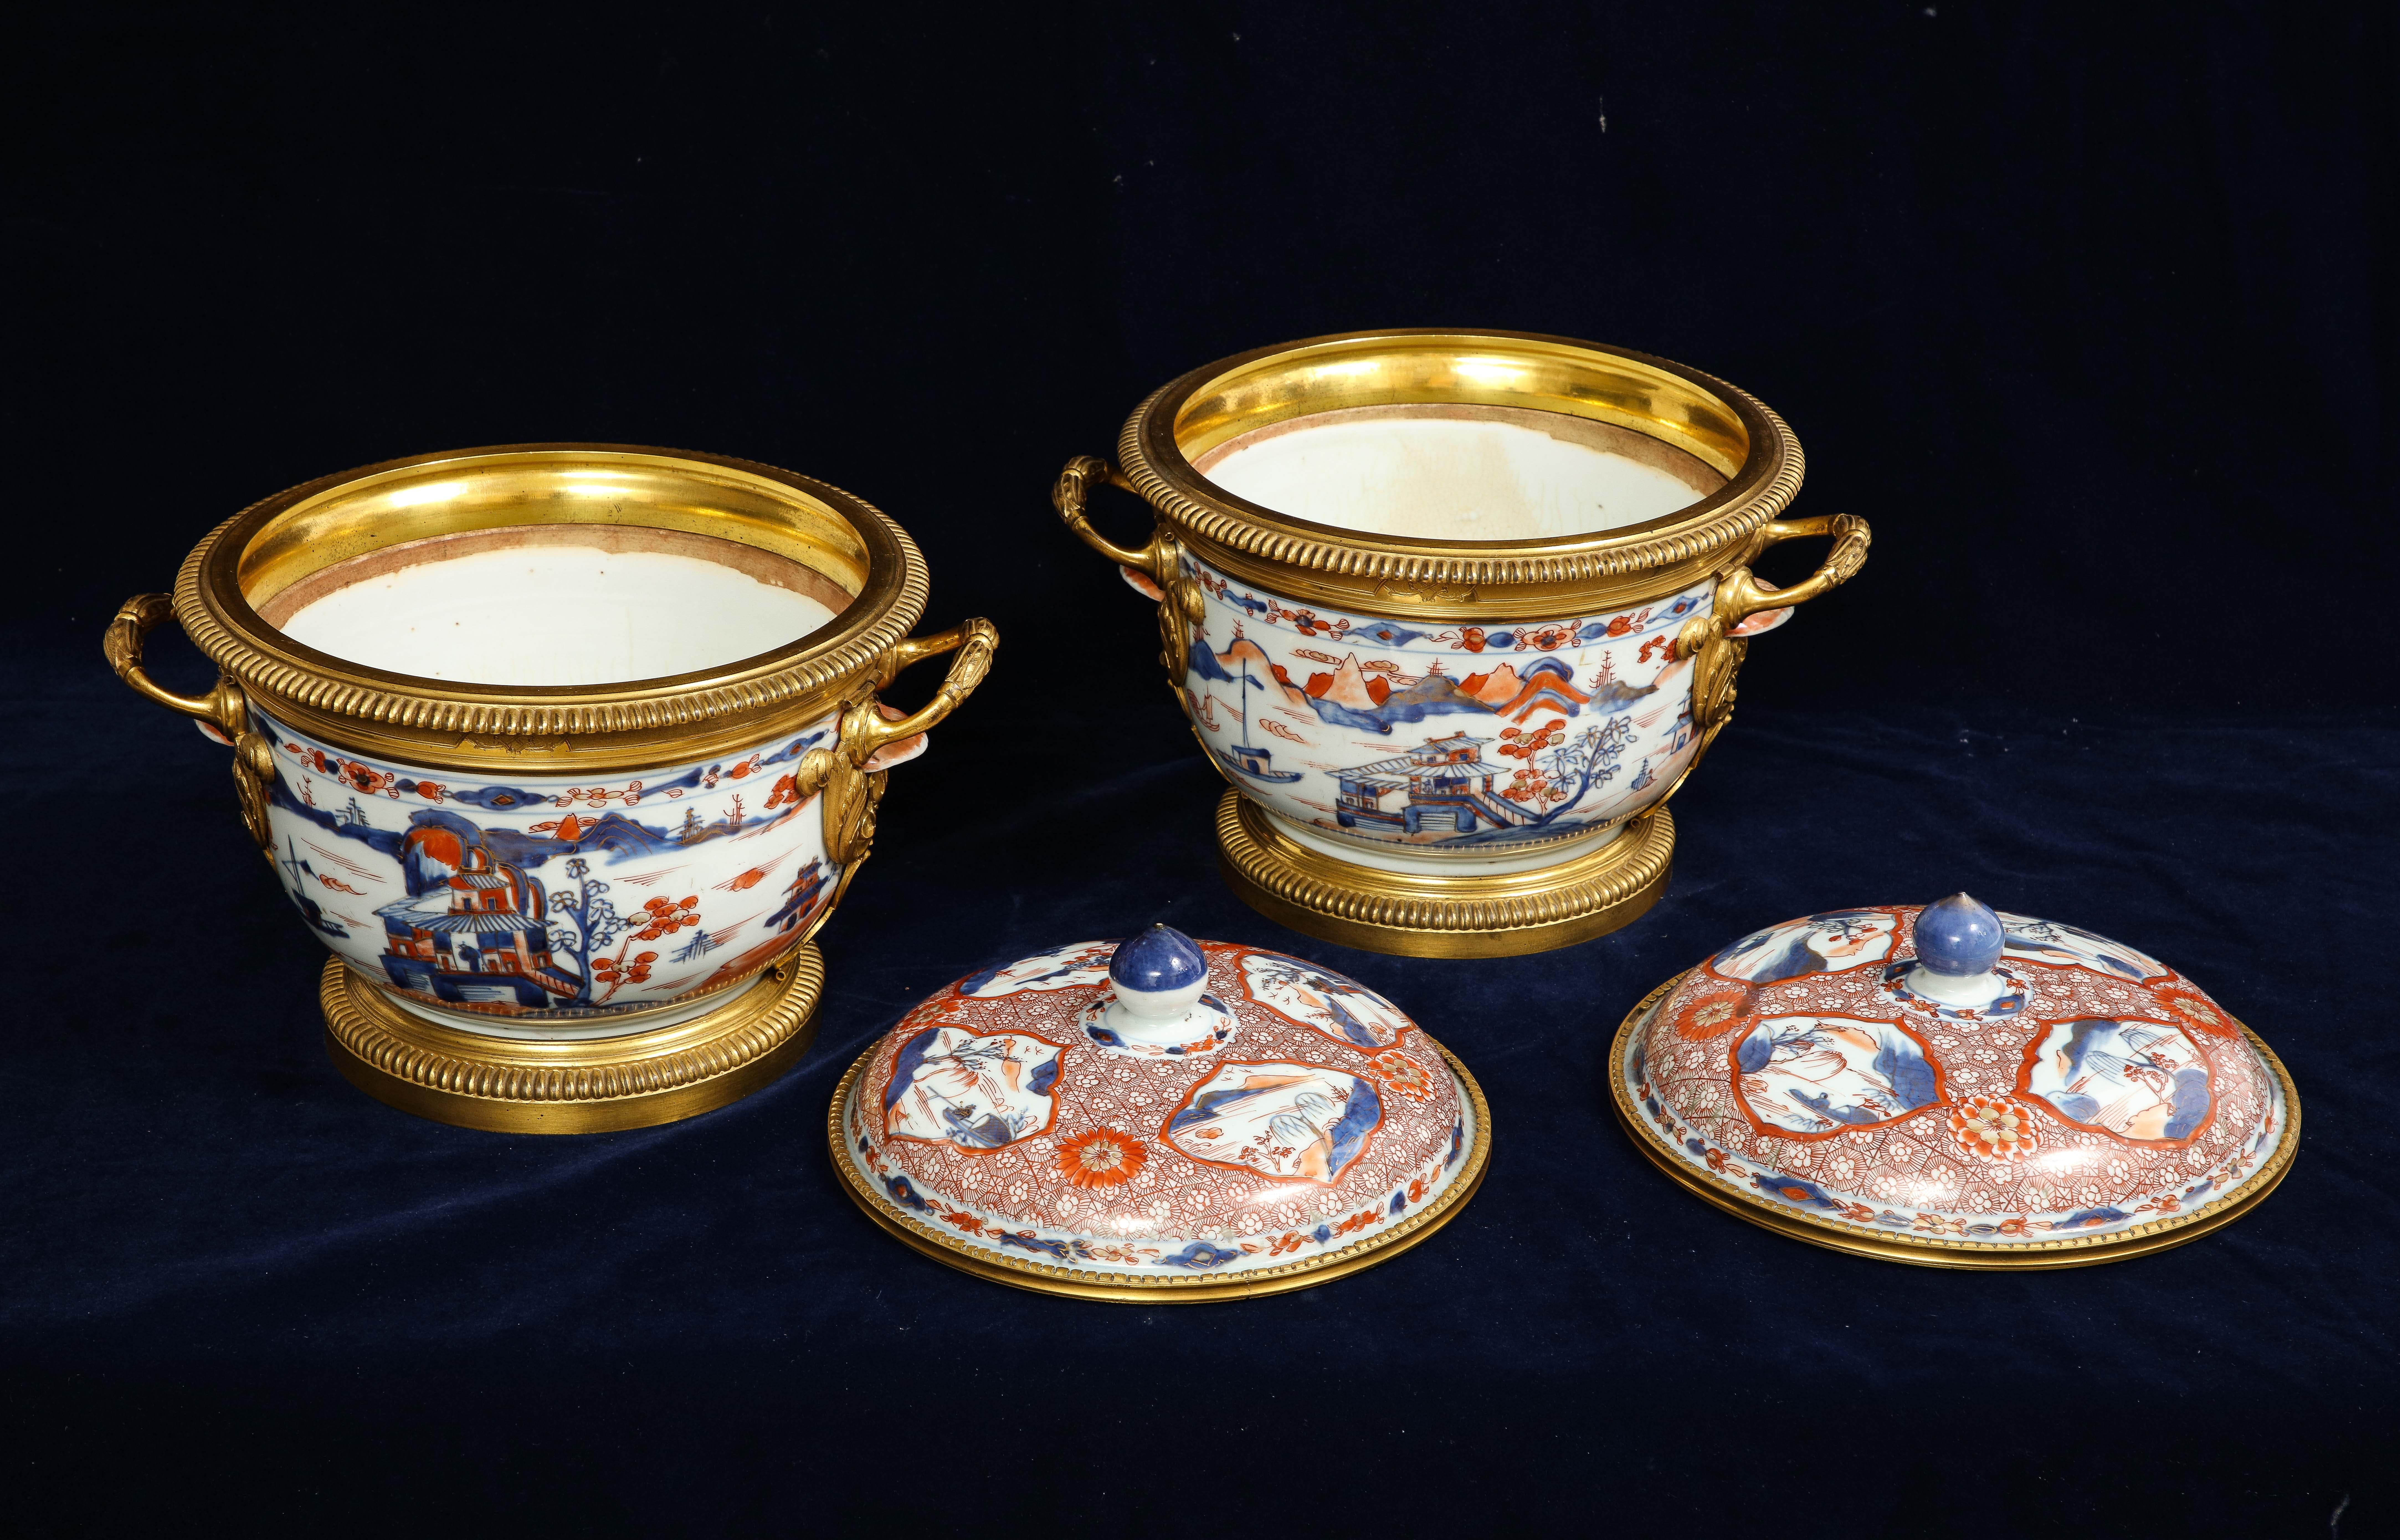 Bronze Pair 18th C. Chinese Imari Porcelain & French Ormolu Mounted Covered Cachepots For Sale